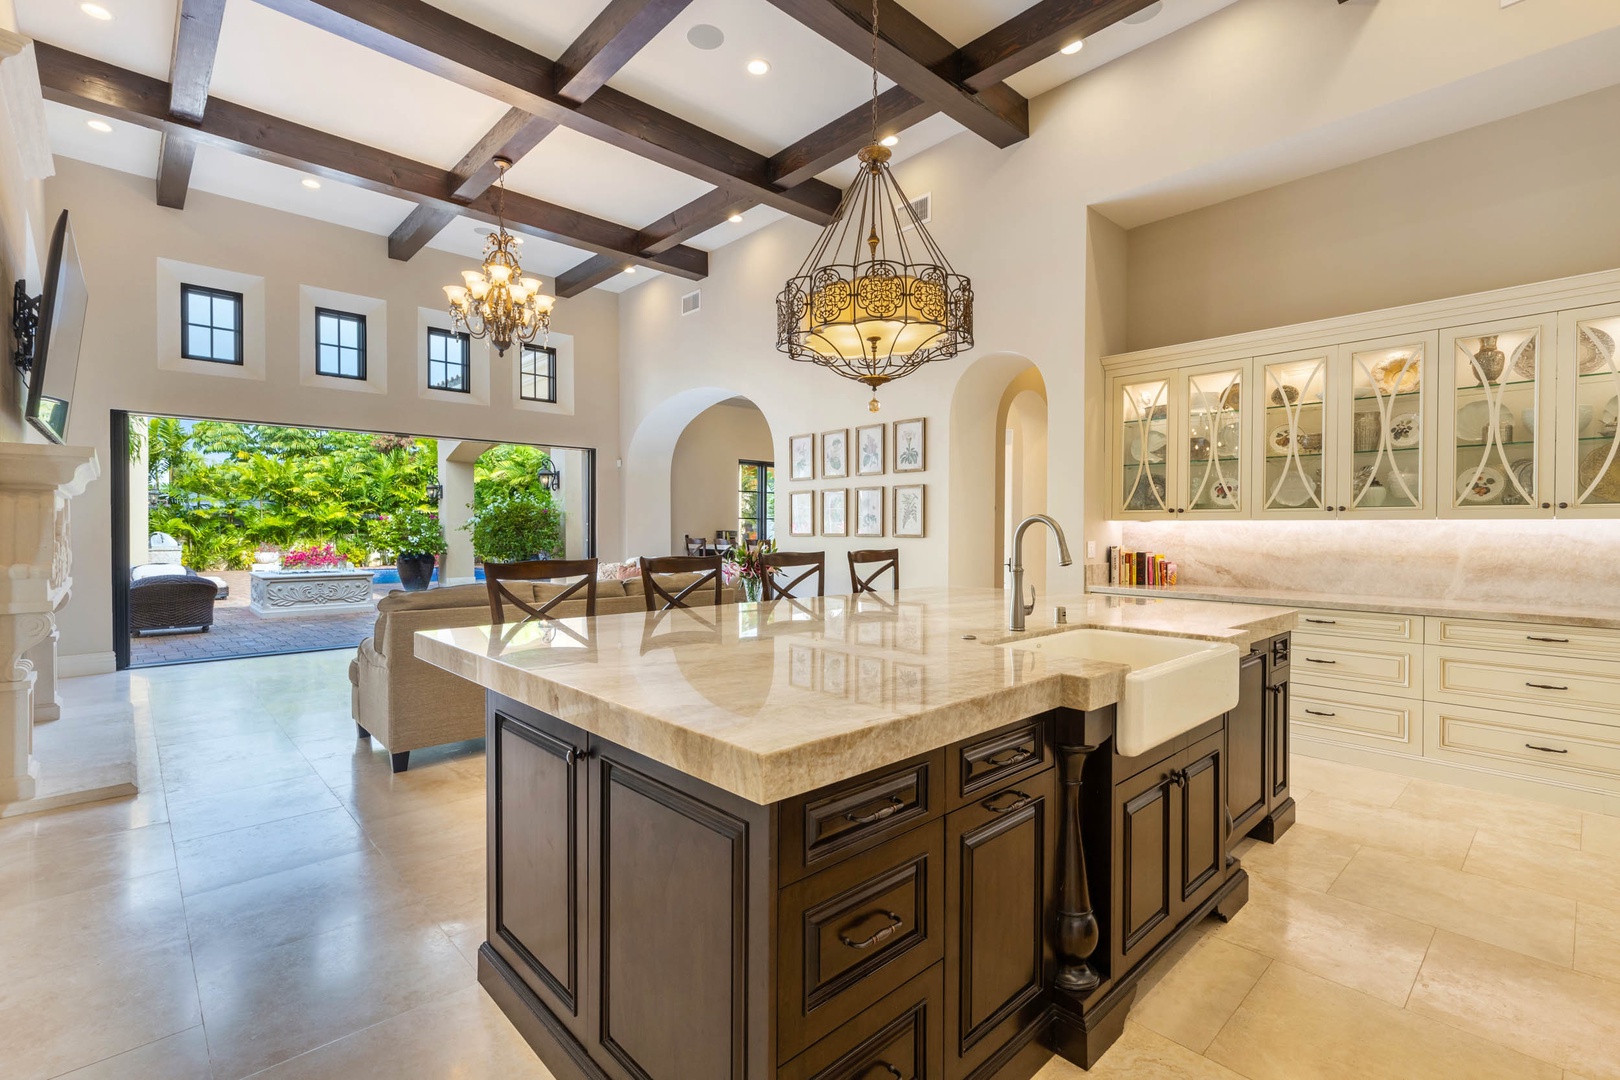 Honolulu Vacation Rentals, The Kahala Mansion - The open floorplan connects lania, living, kitchen and dining for indoor-outdoor living.